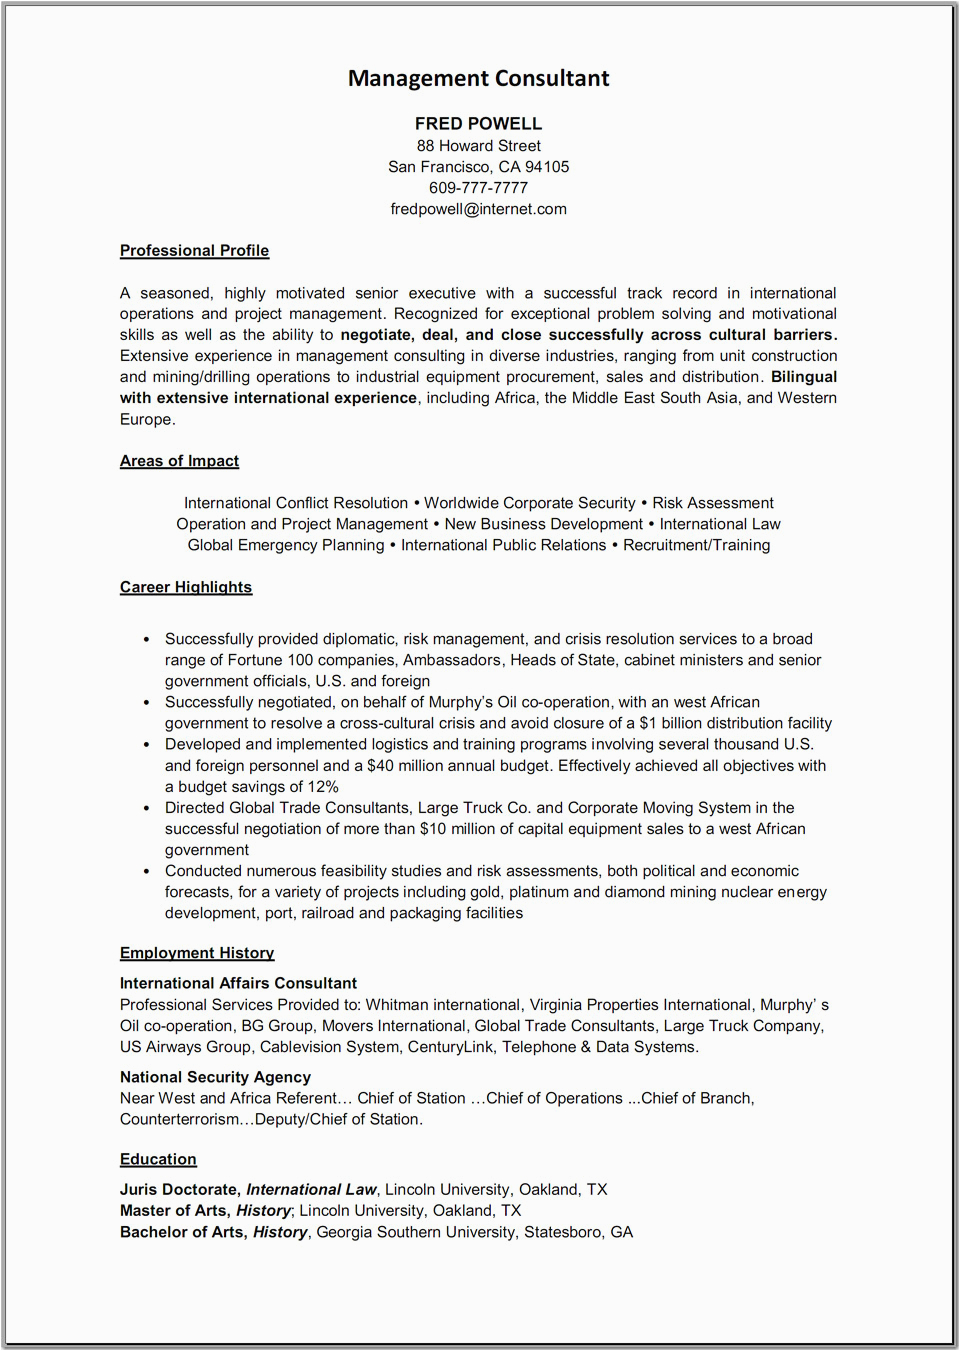 Sample Resume with Masters Degree In Progress 12 13 How to List Experience On A Resume